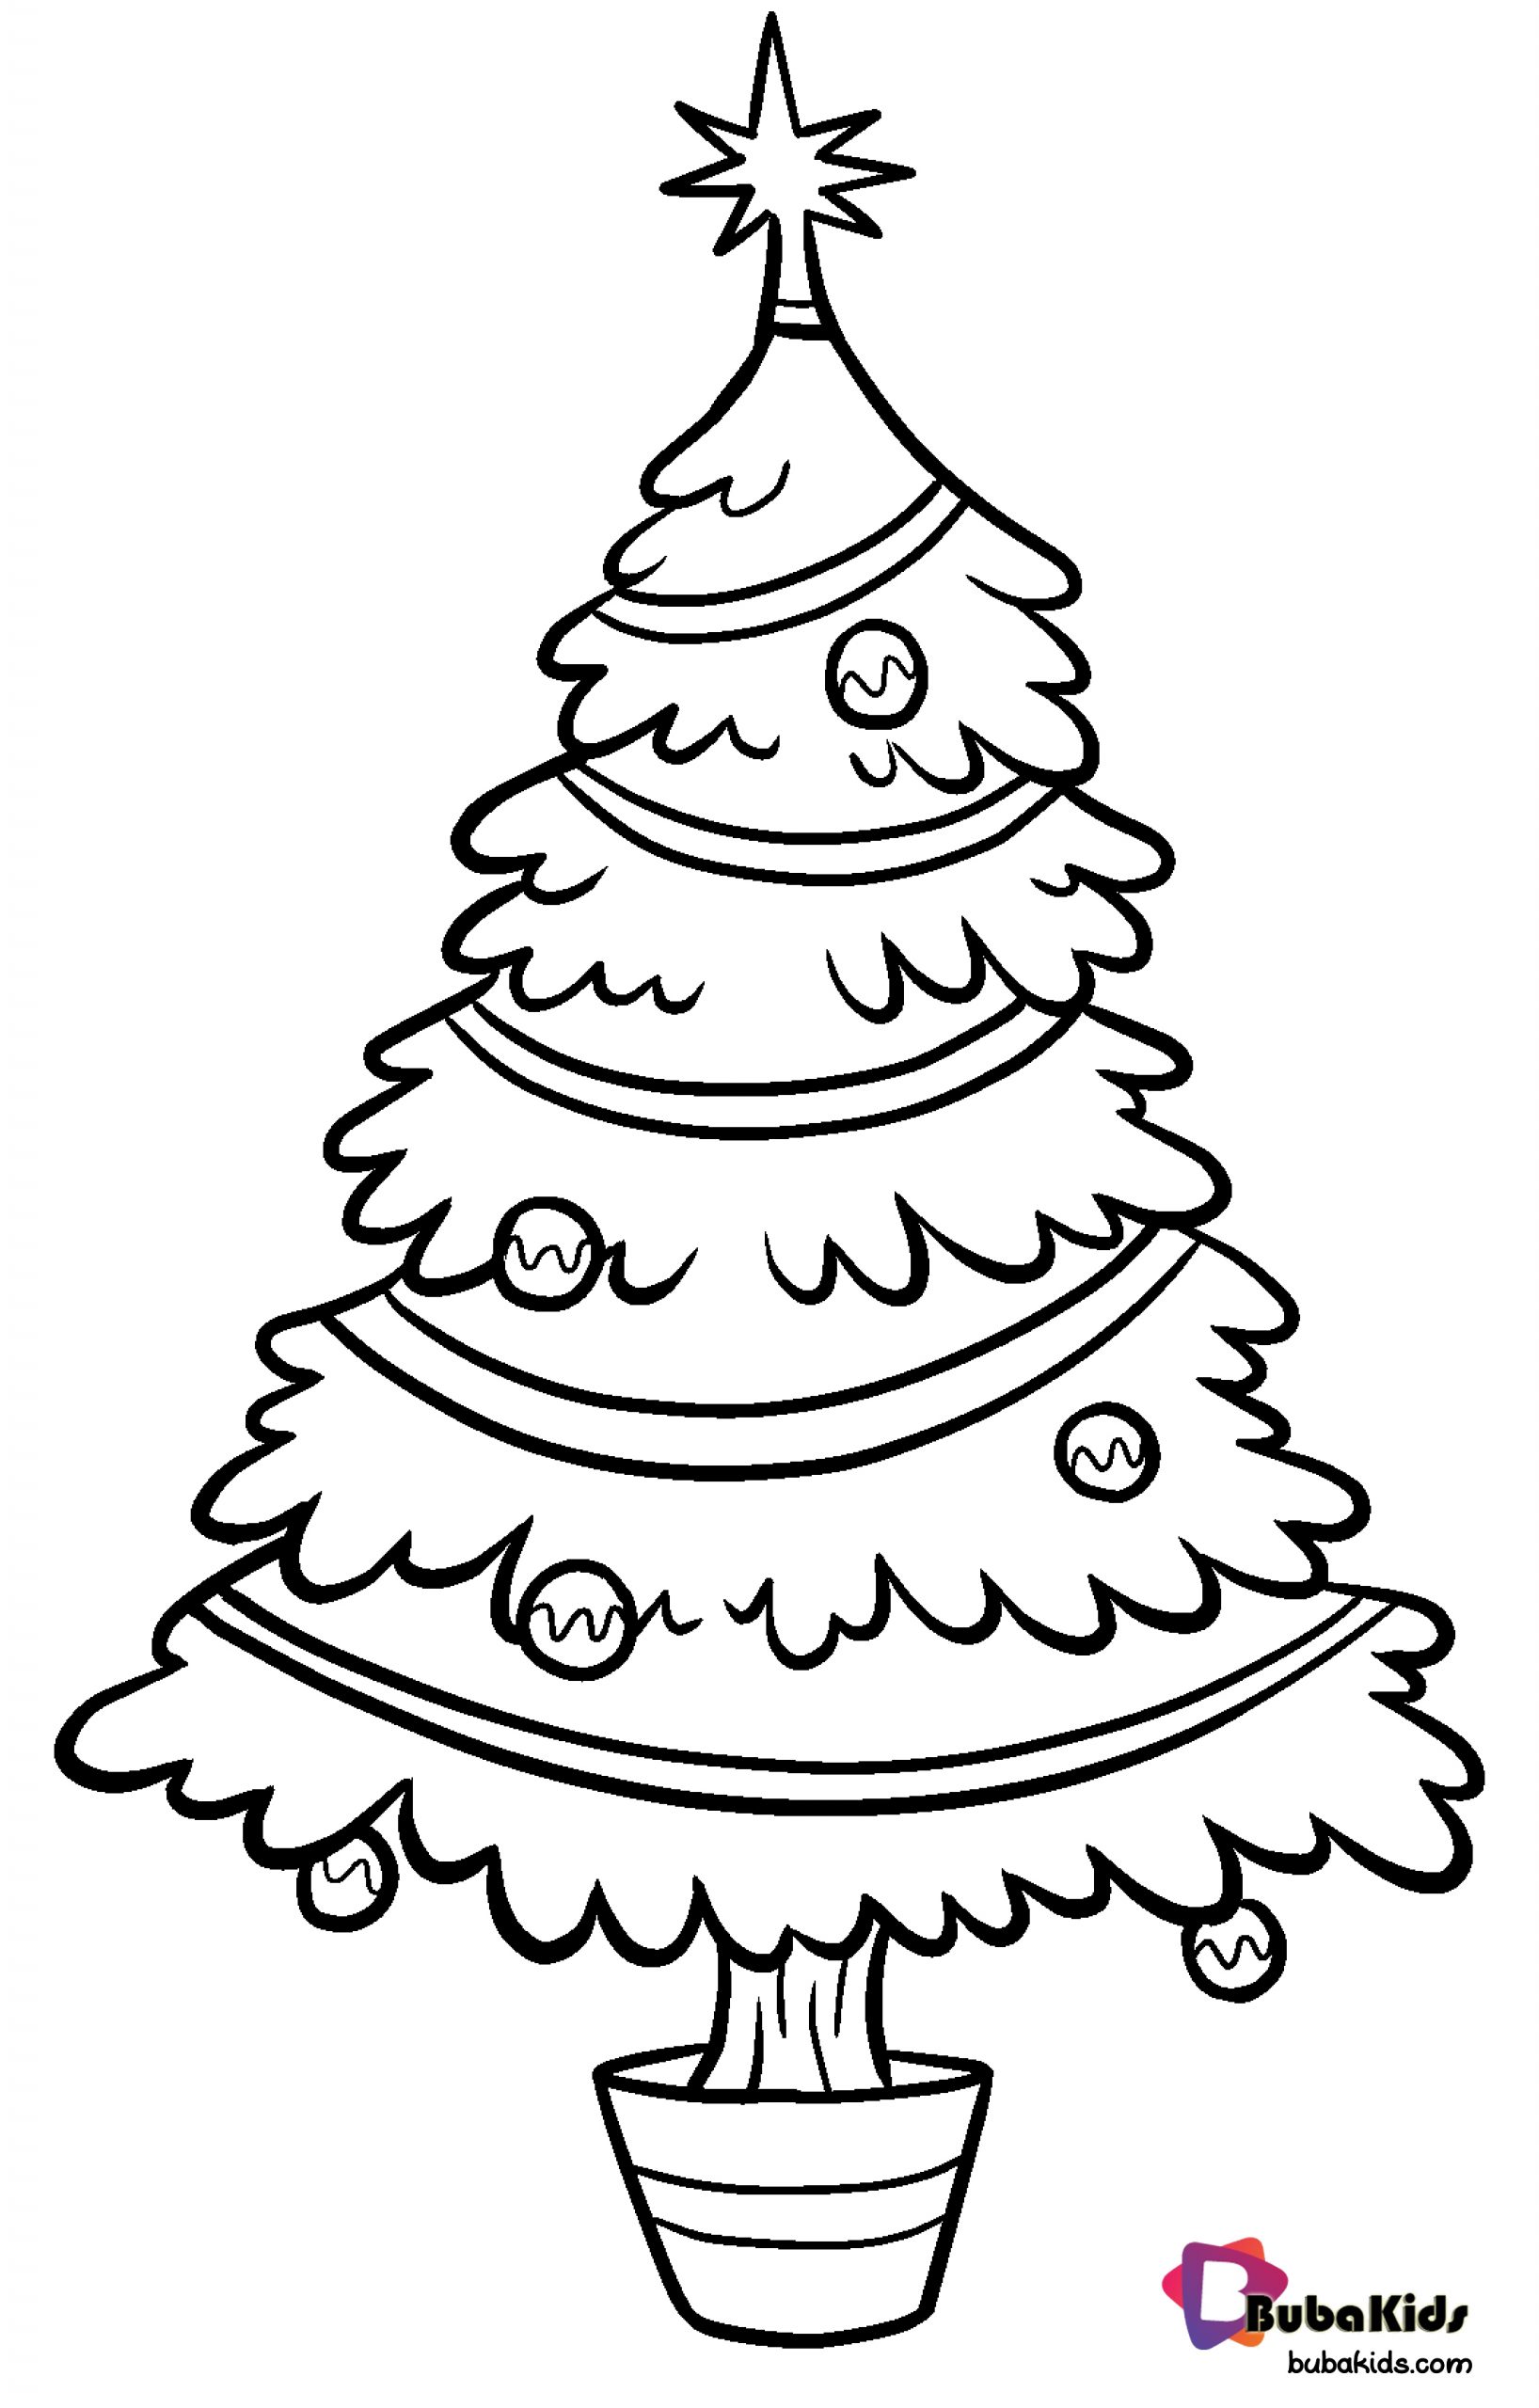 Free download and printable christmas tree coloring pages. Wallpaper